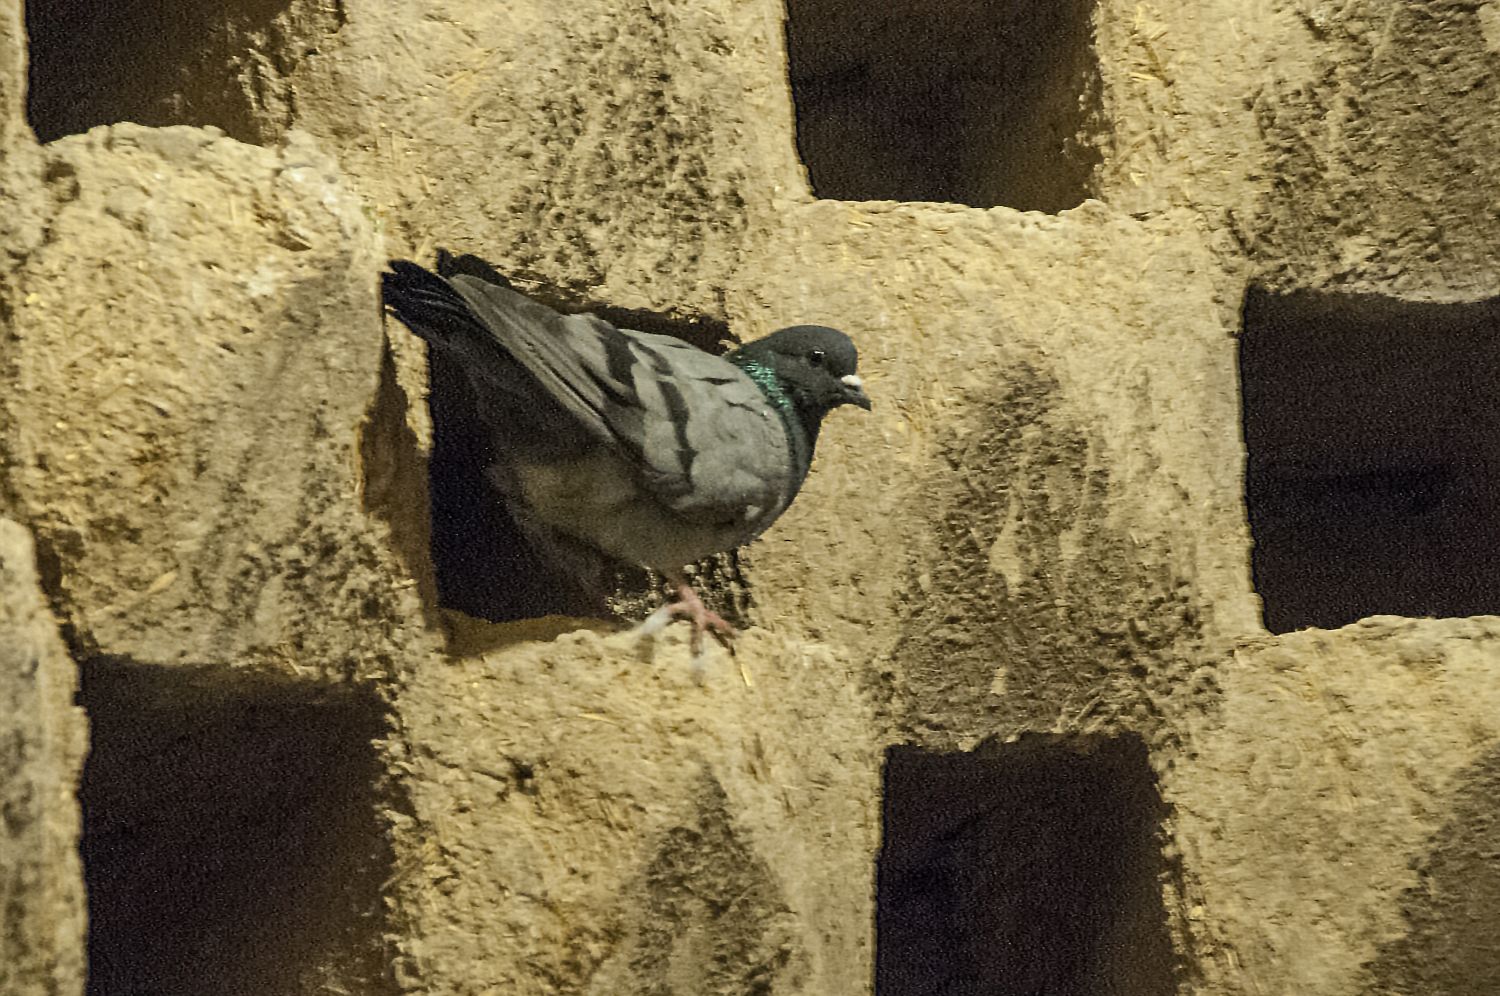 Pigeon tower (kabutarkhanah)&nbsp;in Mardavij Neighborhood of Isfahan, interior view showing a pigeon roosting on a ledge.